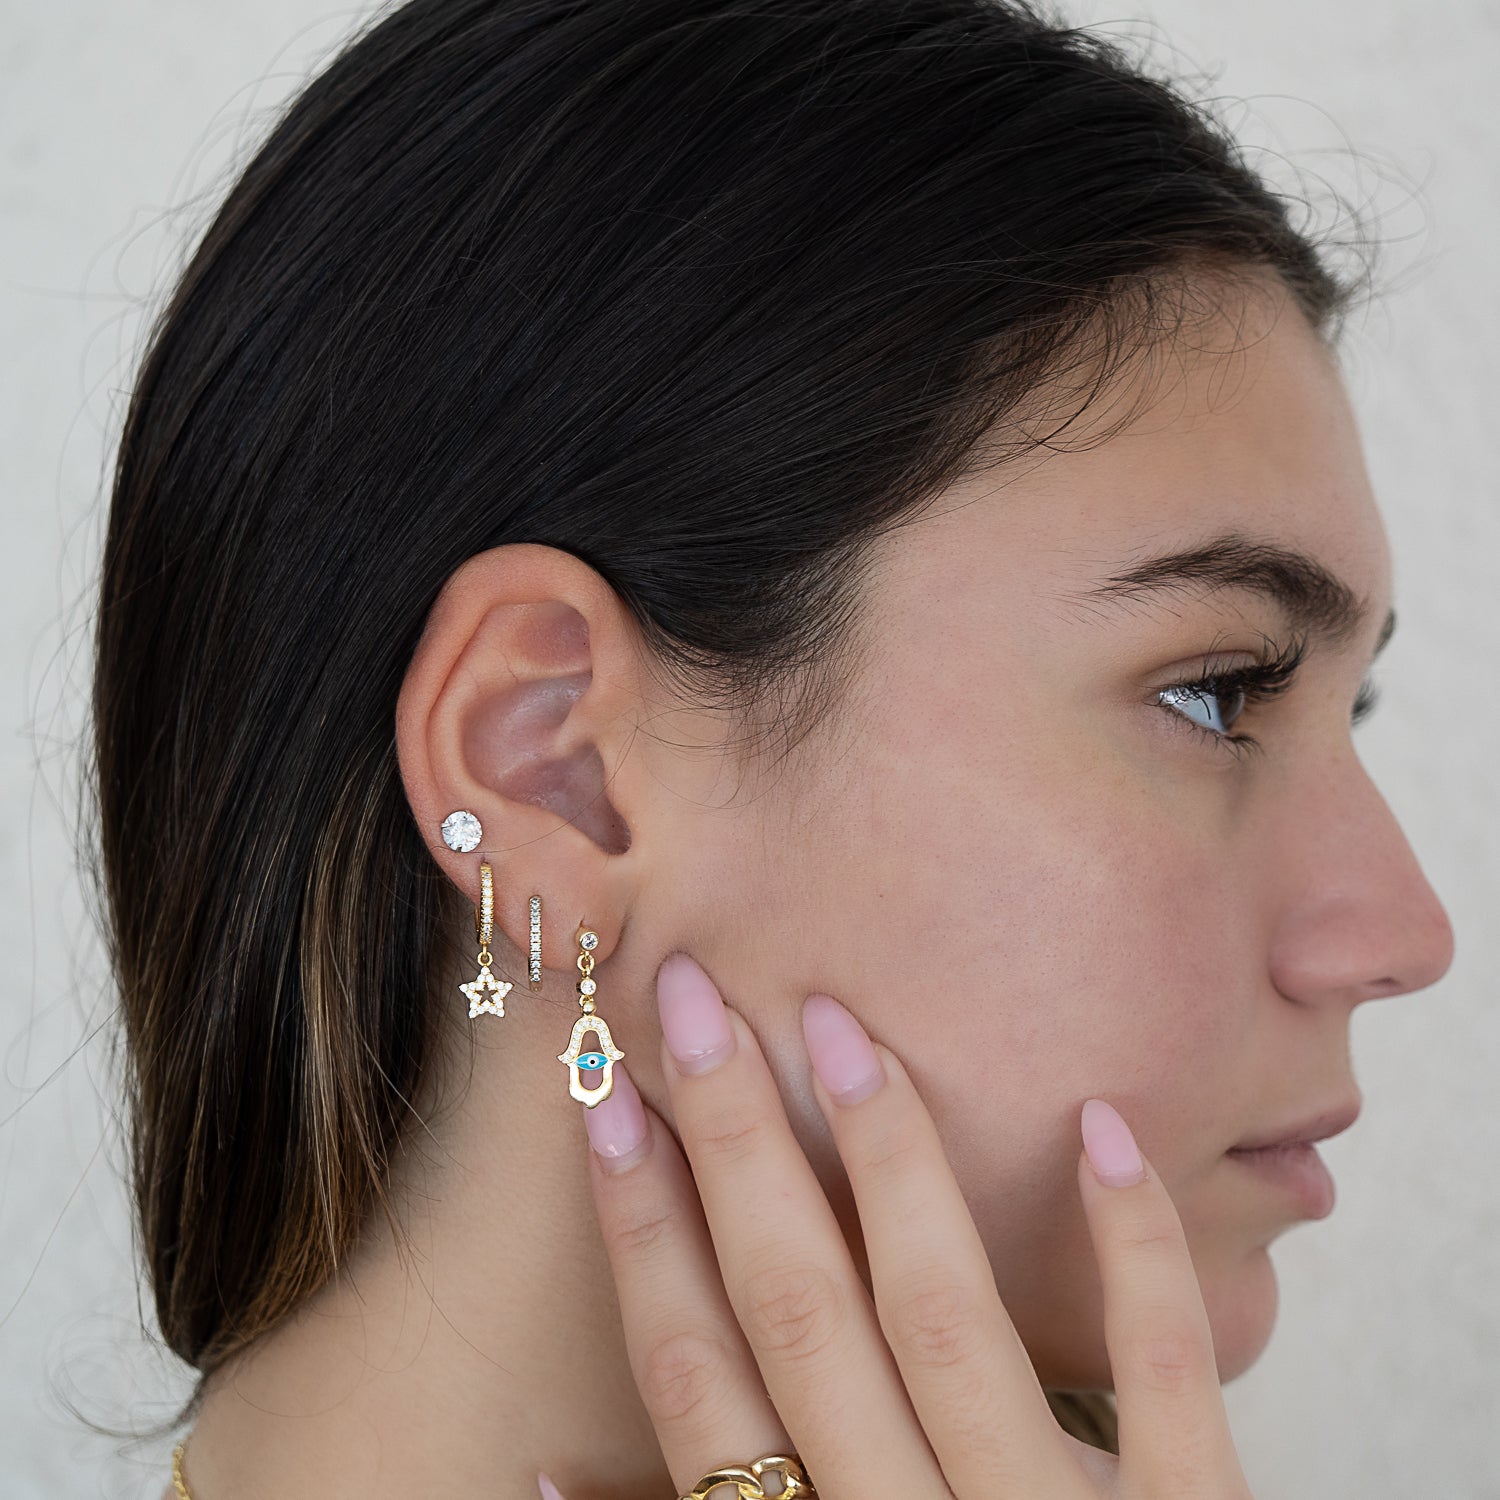 The earrings adding a touch of beauty and spirituality to the model&#39;s look